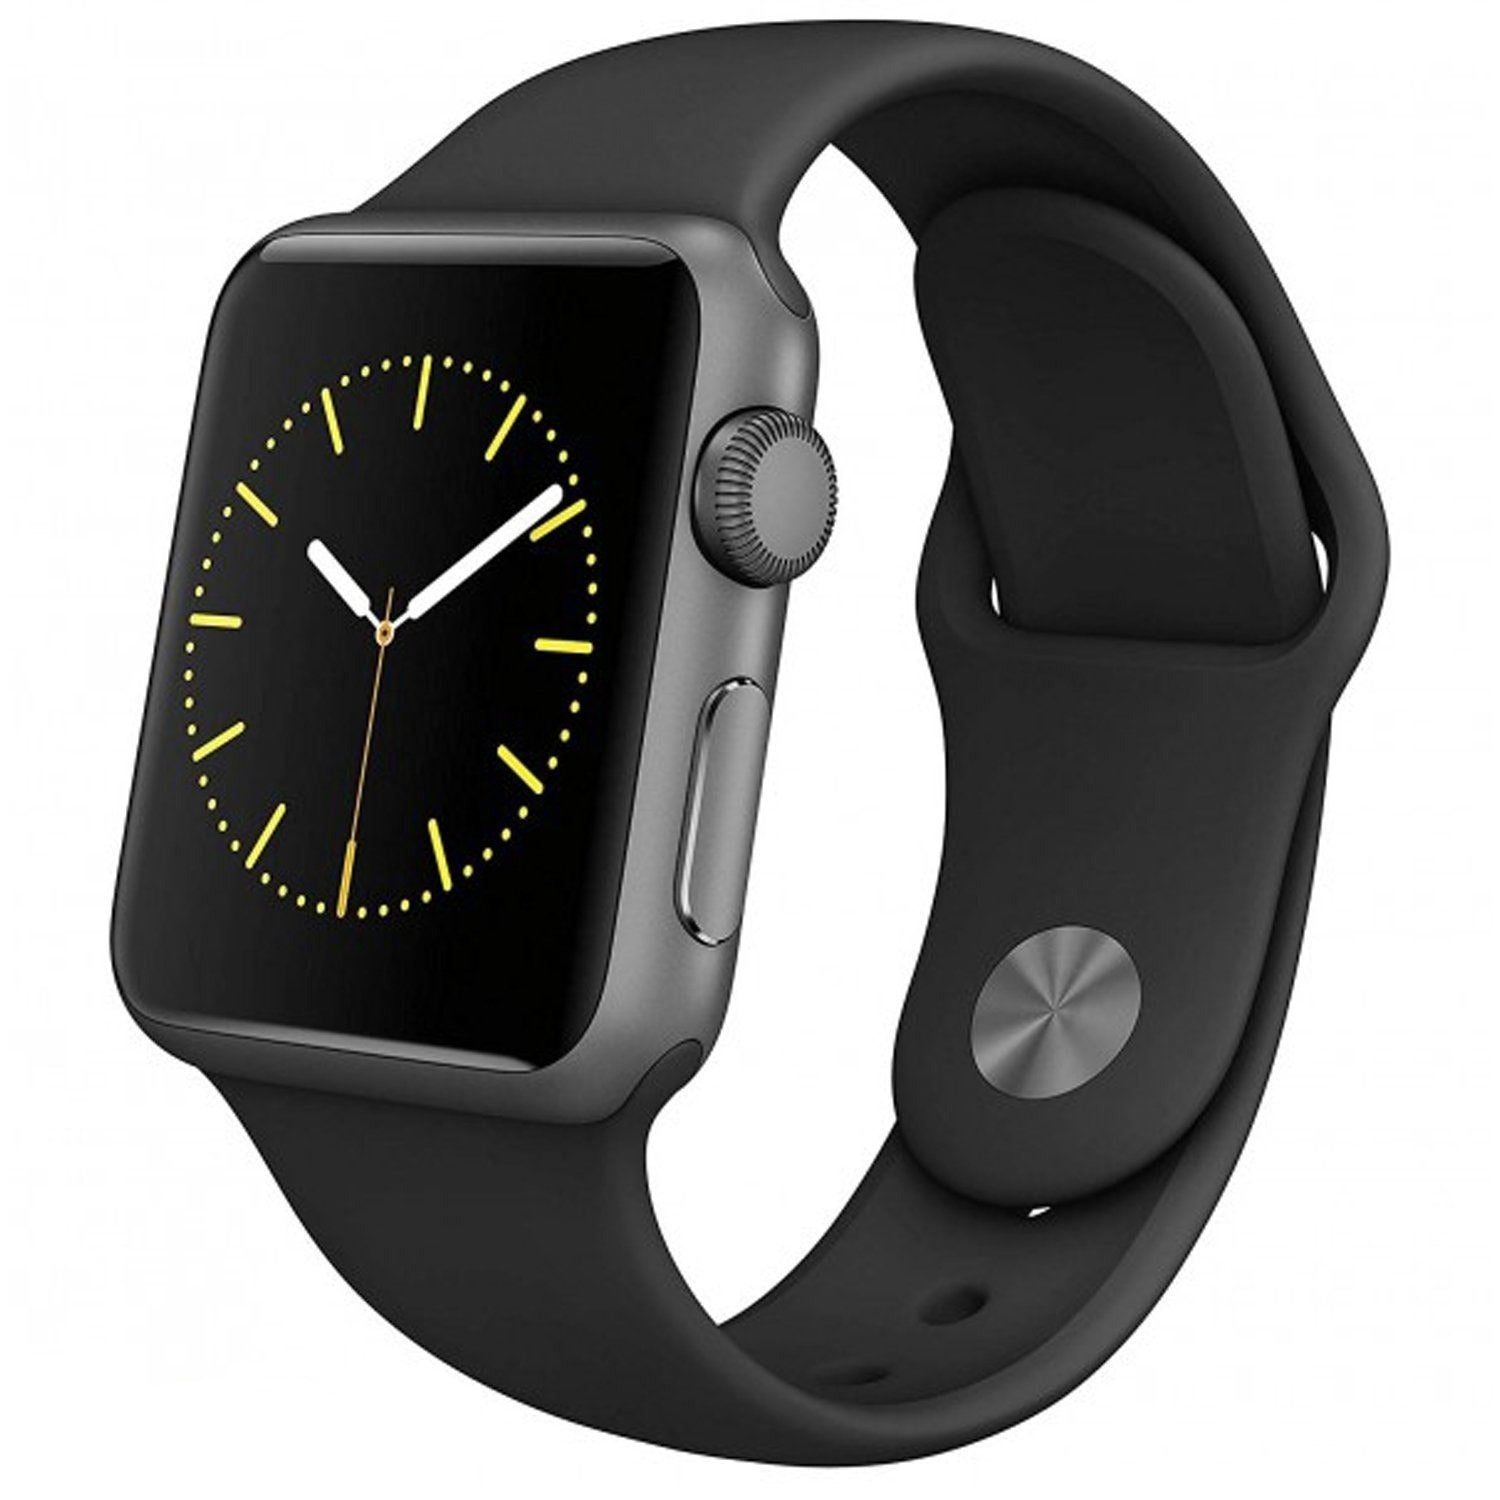 Apple Watch Smartwatch - Assorted Sizes and Colors / Silver / 38mm